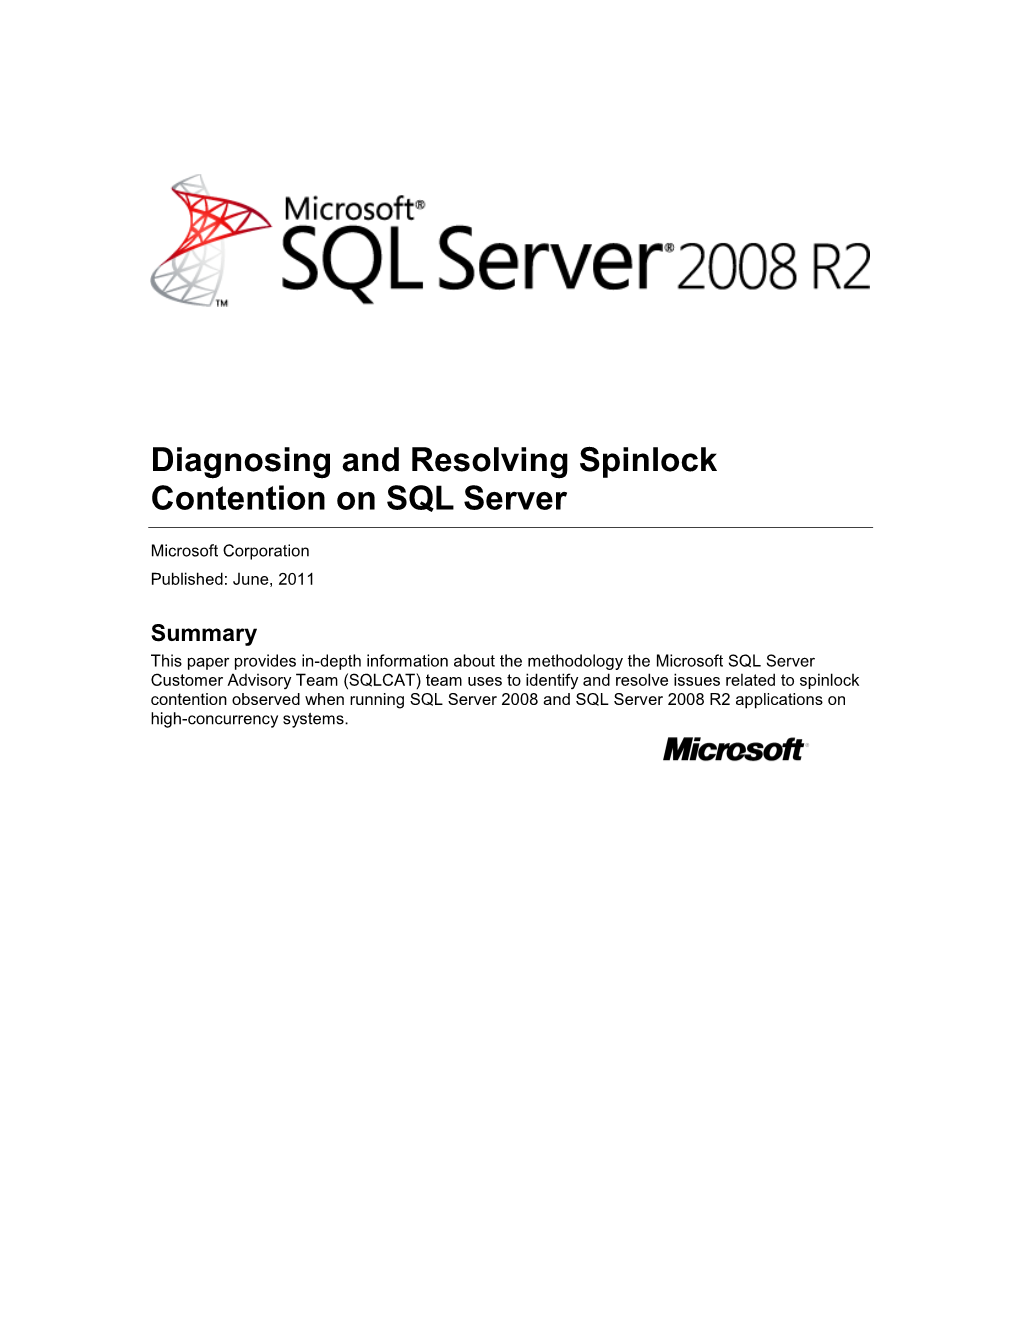 Diagnosing and Resolving Spinlock Contention on SQL Server